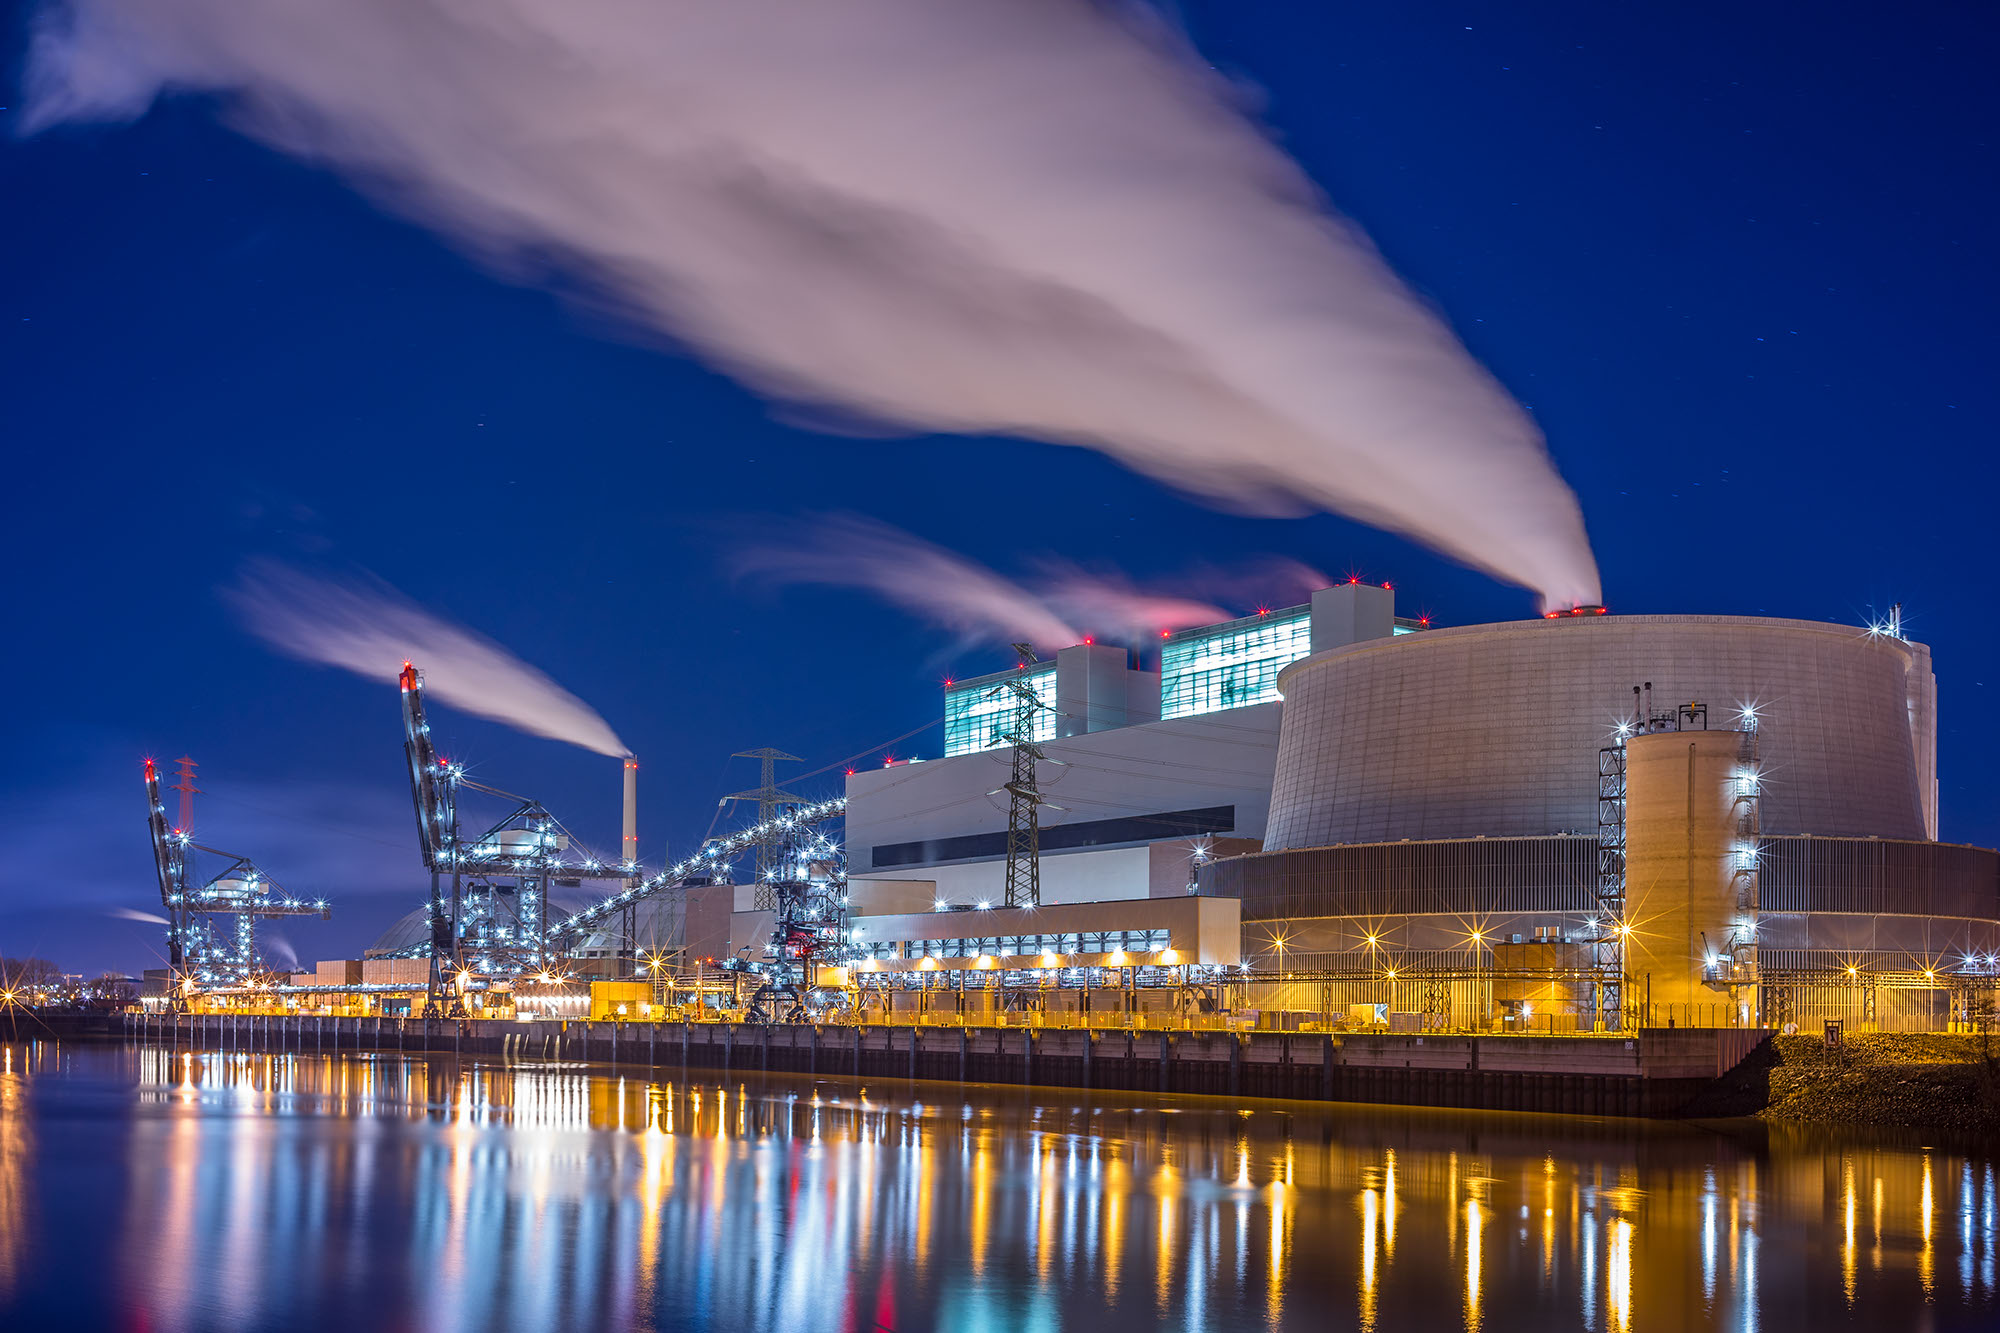 A stock photo of a coal fired power plant on a body of water at night